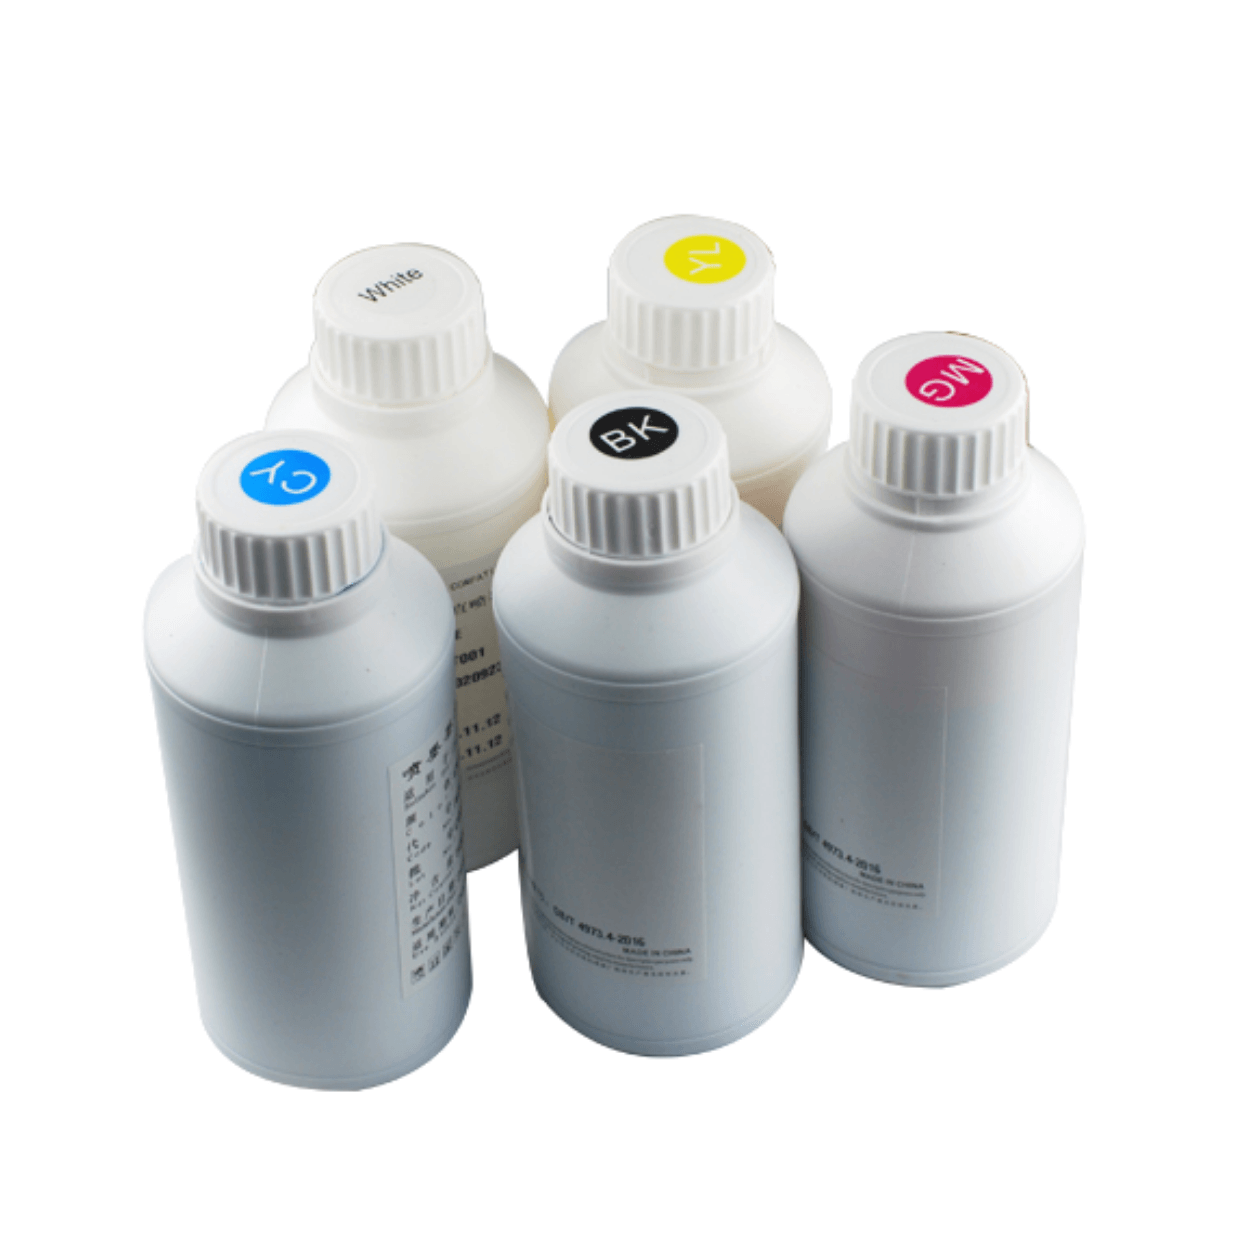 Procolored DTG Textile Ink - Procolored